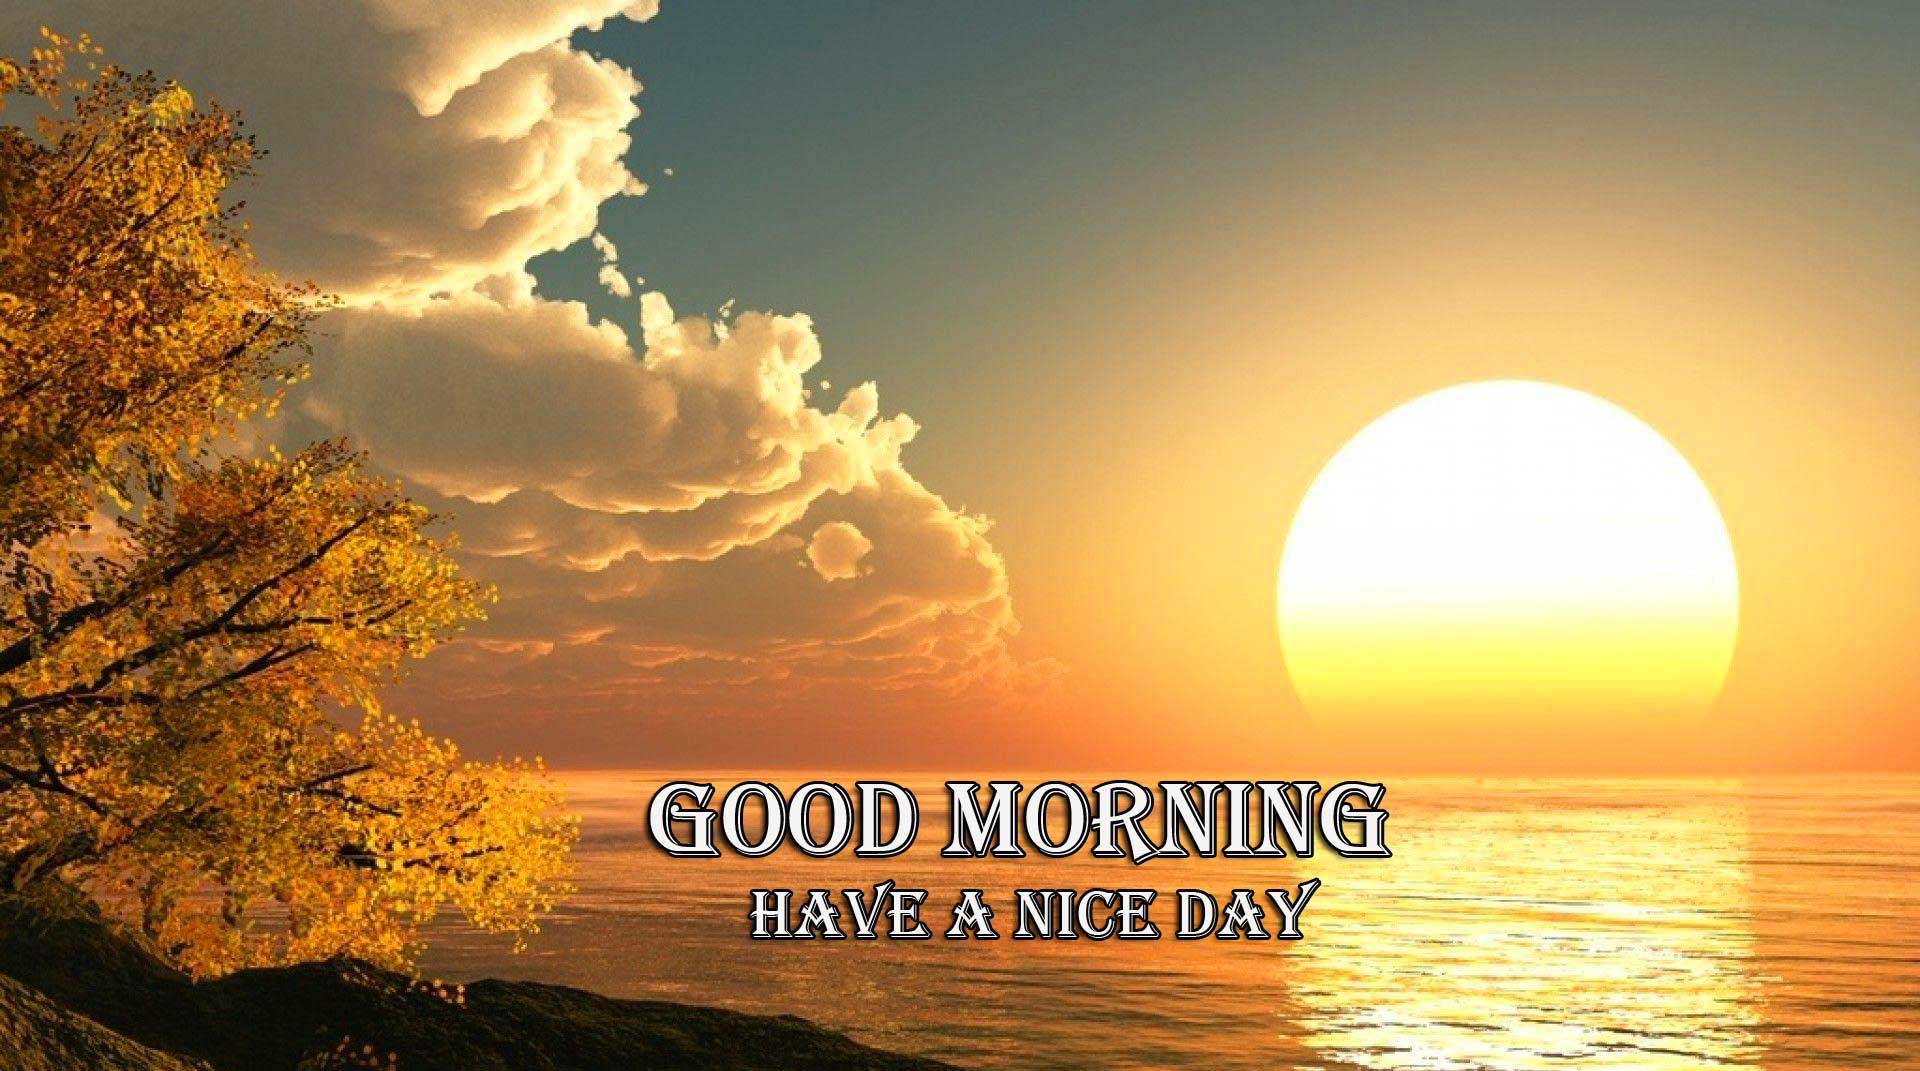 Beautiful Free Good Morning Wishes With Sunrise Pics Wallpaper Free Download 